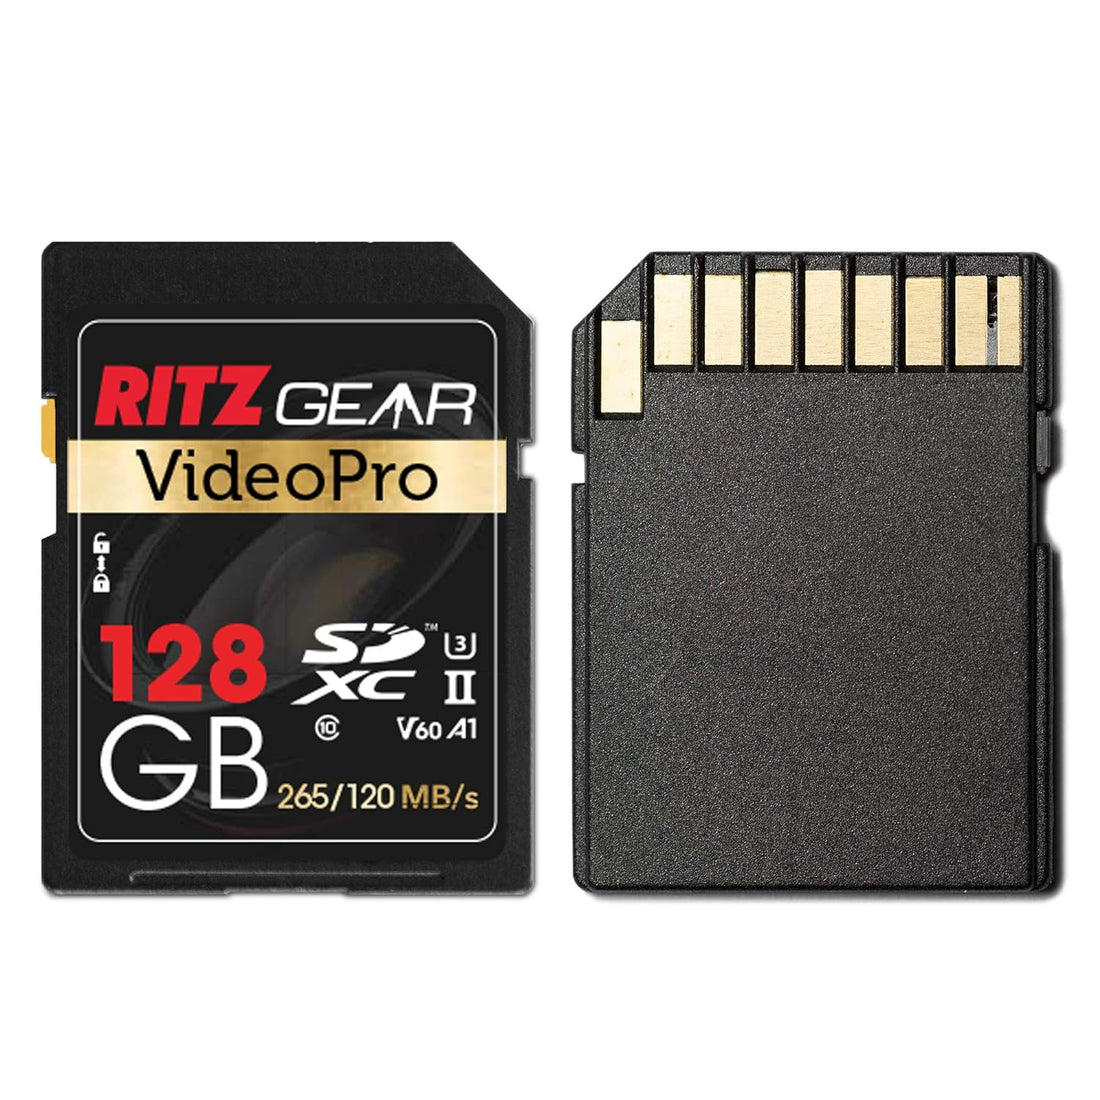 SD Card UHS-II 128GB SDXC Memory Card U3 V60 A1, Extreme Performance Video Pro SD Card (R 265mb/s 120mb/s Write) for Advanced DSLR Functions, Well-Suited for Video, Including 4K,8K, 3D, Full HD Video